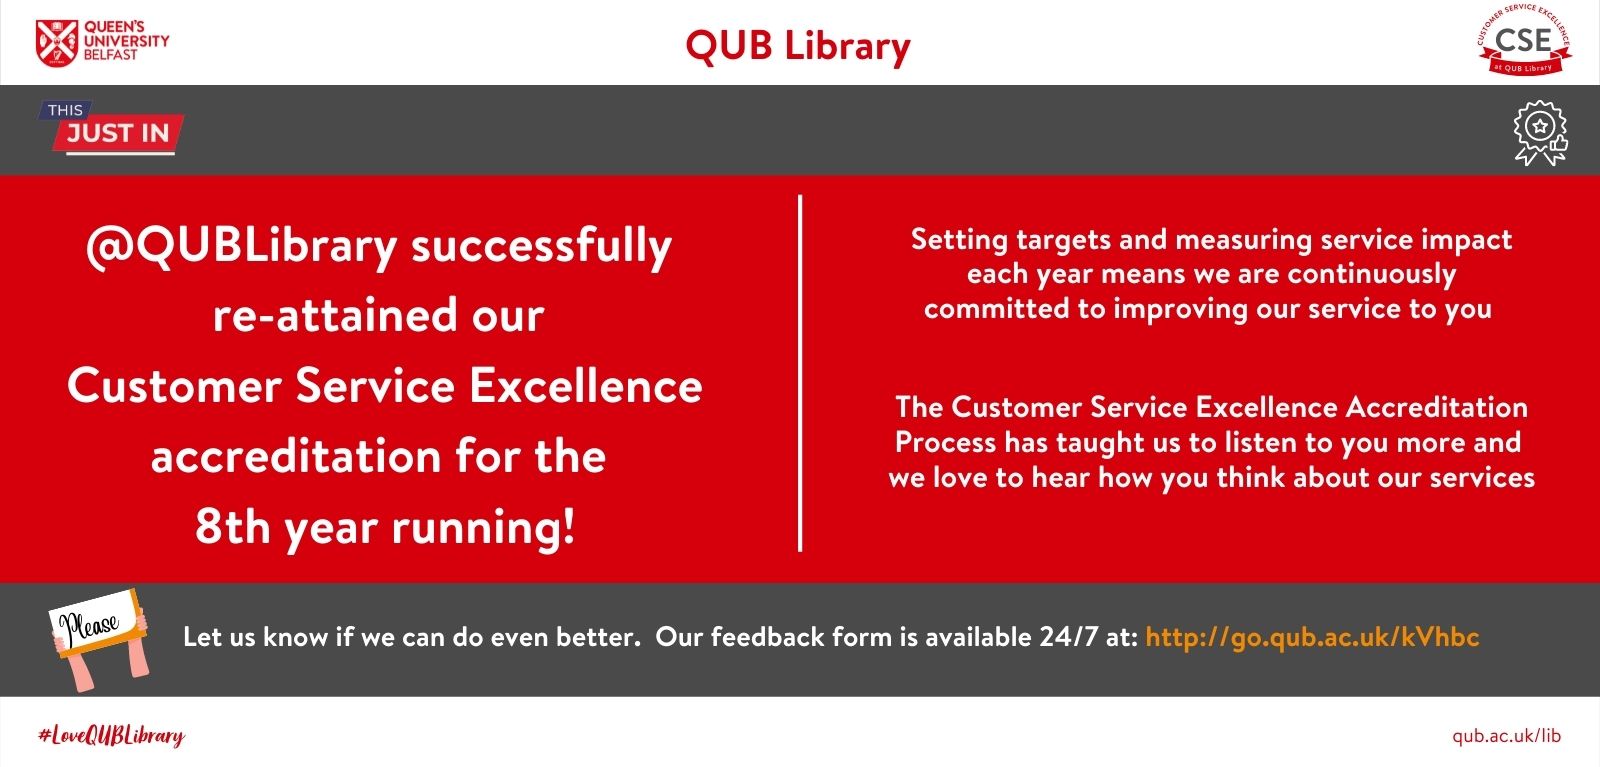 White graphic with grey and red overlay. QUB Library successfully re-attained our Customer Service Excellence accreditation for the 8th year running! Link to feedback form provided http://go.qub.ac.uk/kVhbc